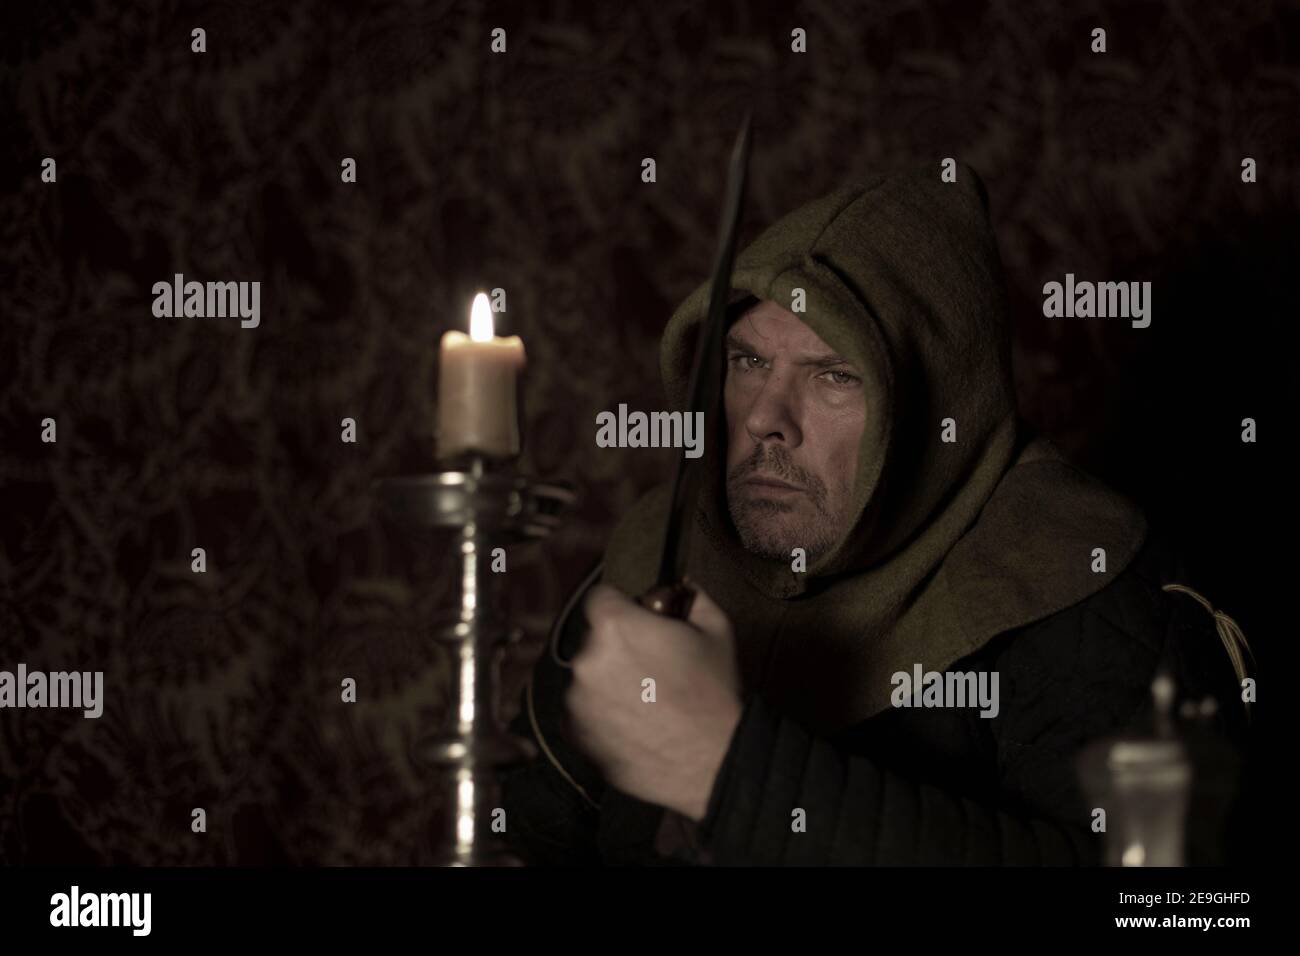 Medieval hooded character sits menacingly by candlelight with dagger Stock Photo